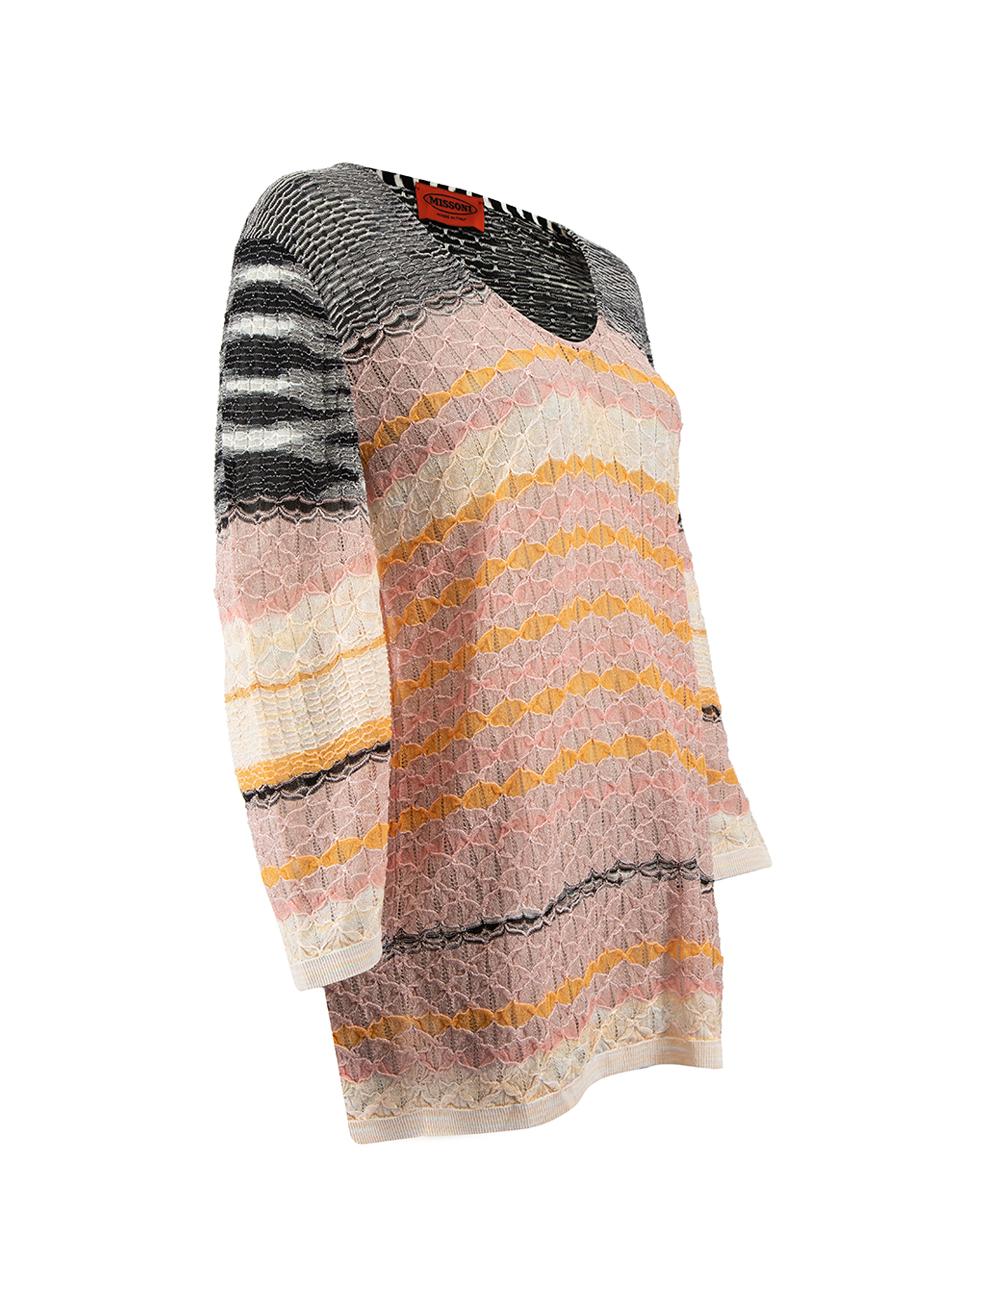 CONDITION is Very good. Minimal wear to top is evident. Minimal loose threads at the hemline on this used Missoni designer resale item.
 
 Details
  Multicolour
 Viscose
 Long sleeve
 V neck
 Elasticated hemline and sleeves
 Relaxed fit
 Slip-on
 
